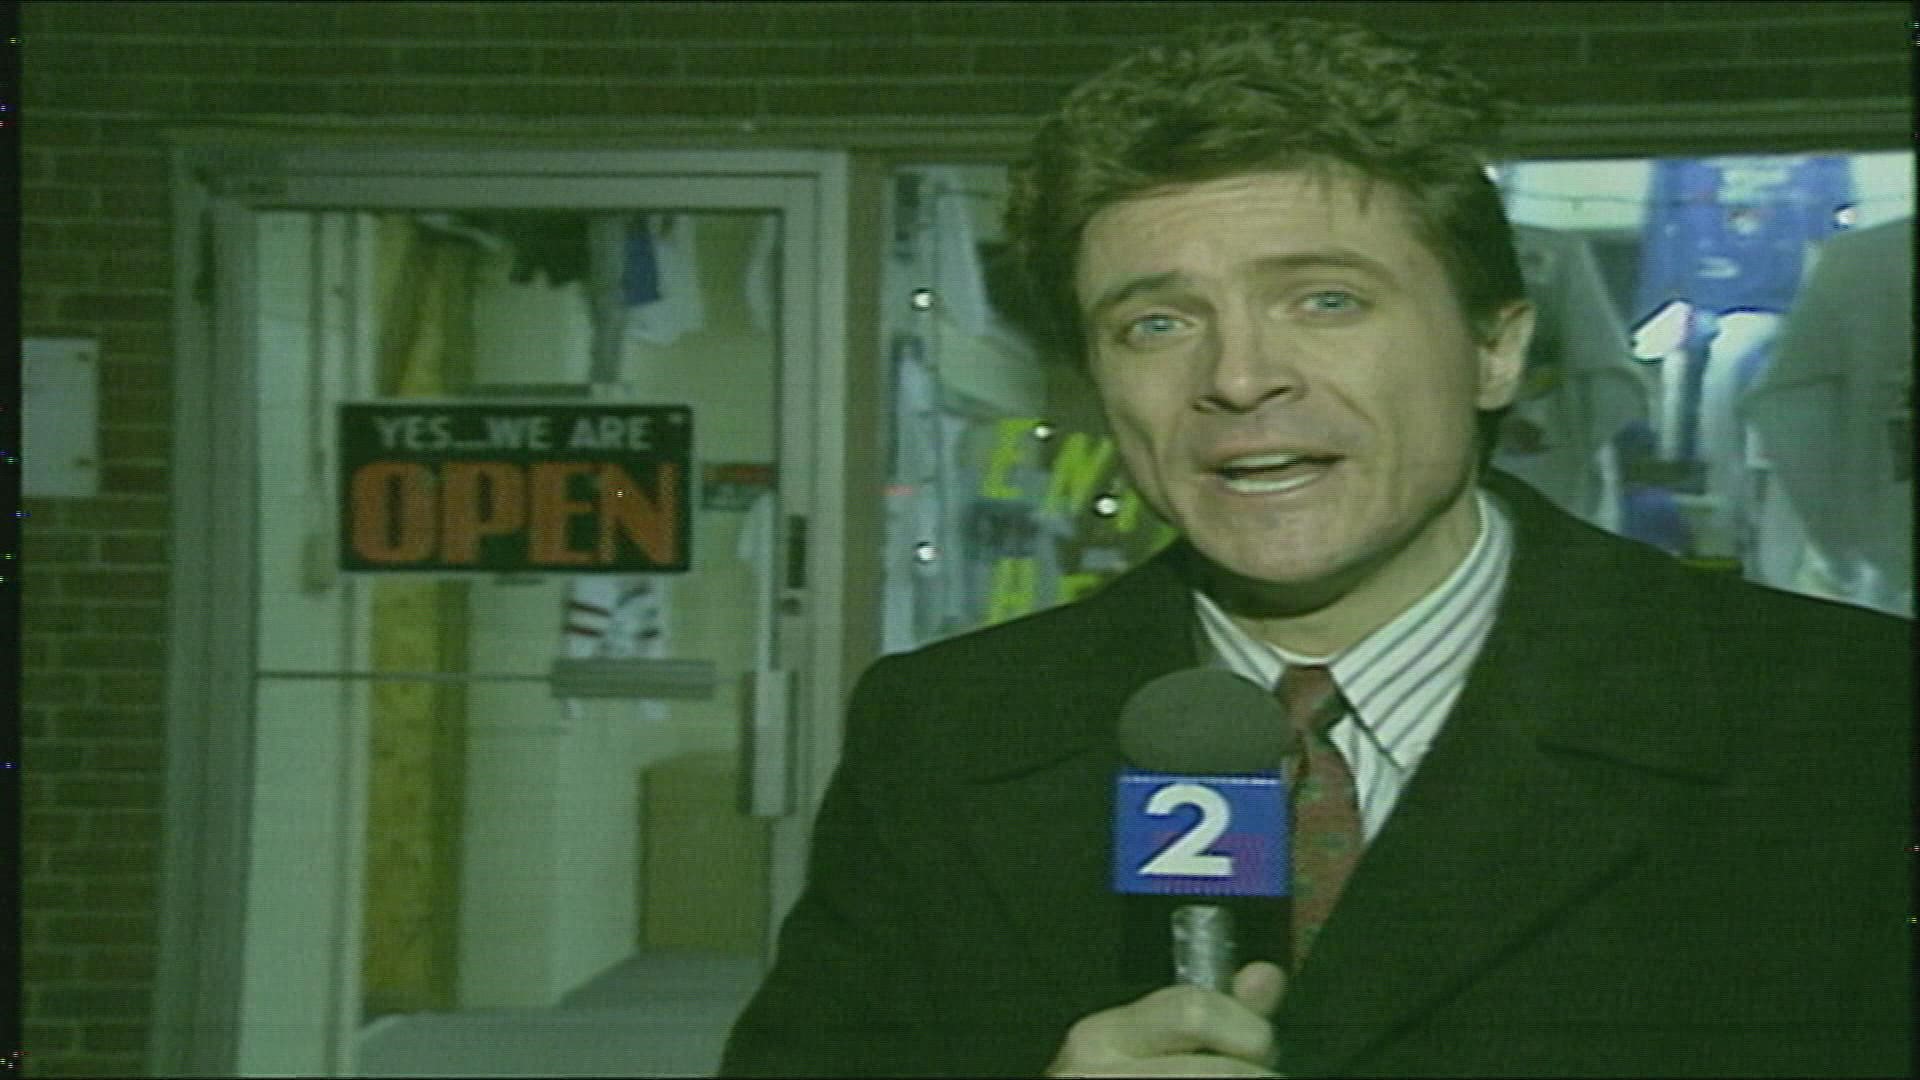 Channel 2 News and Sportscaster in the 80's and 90's